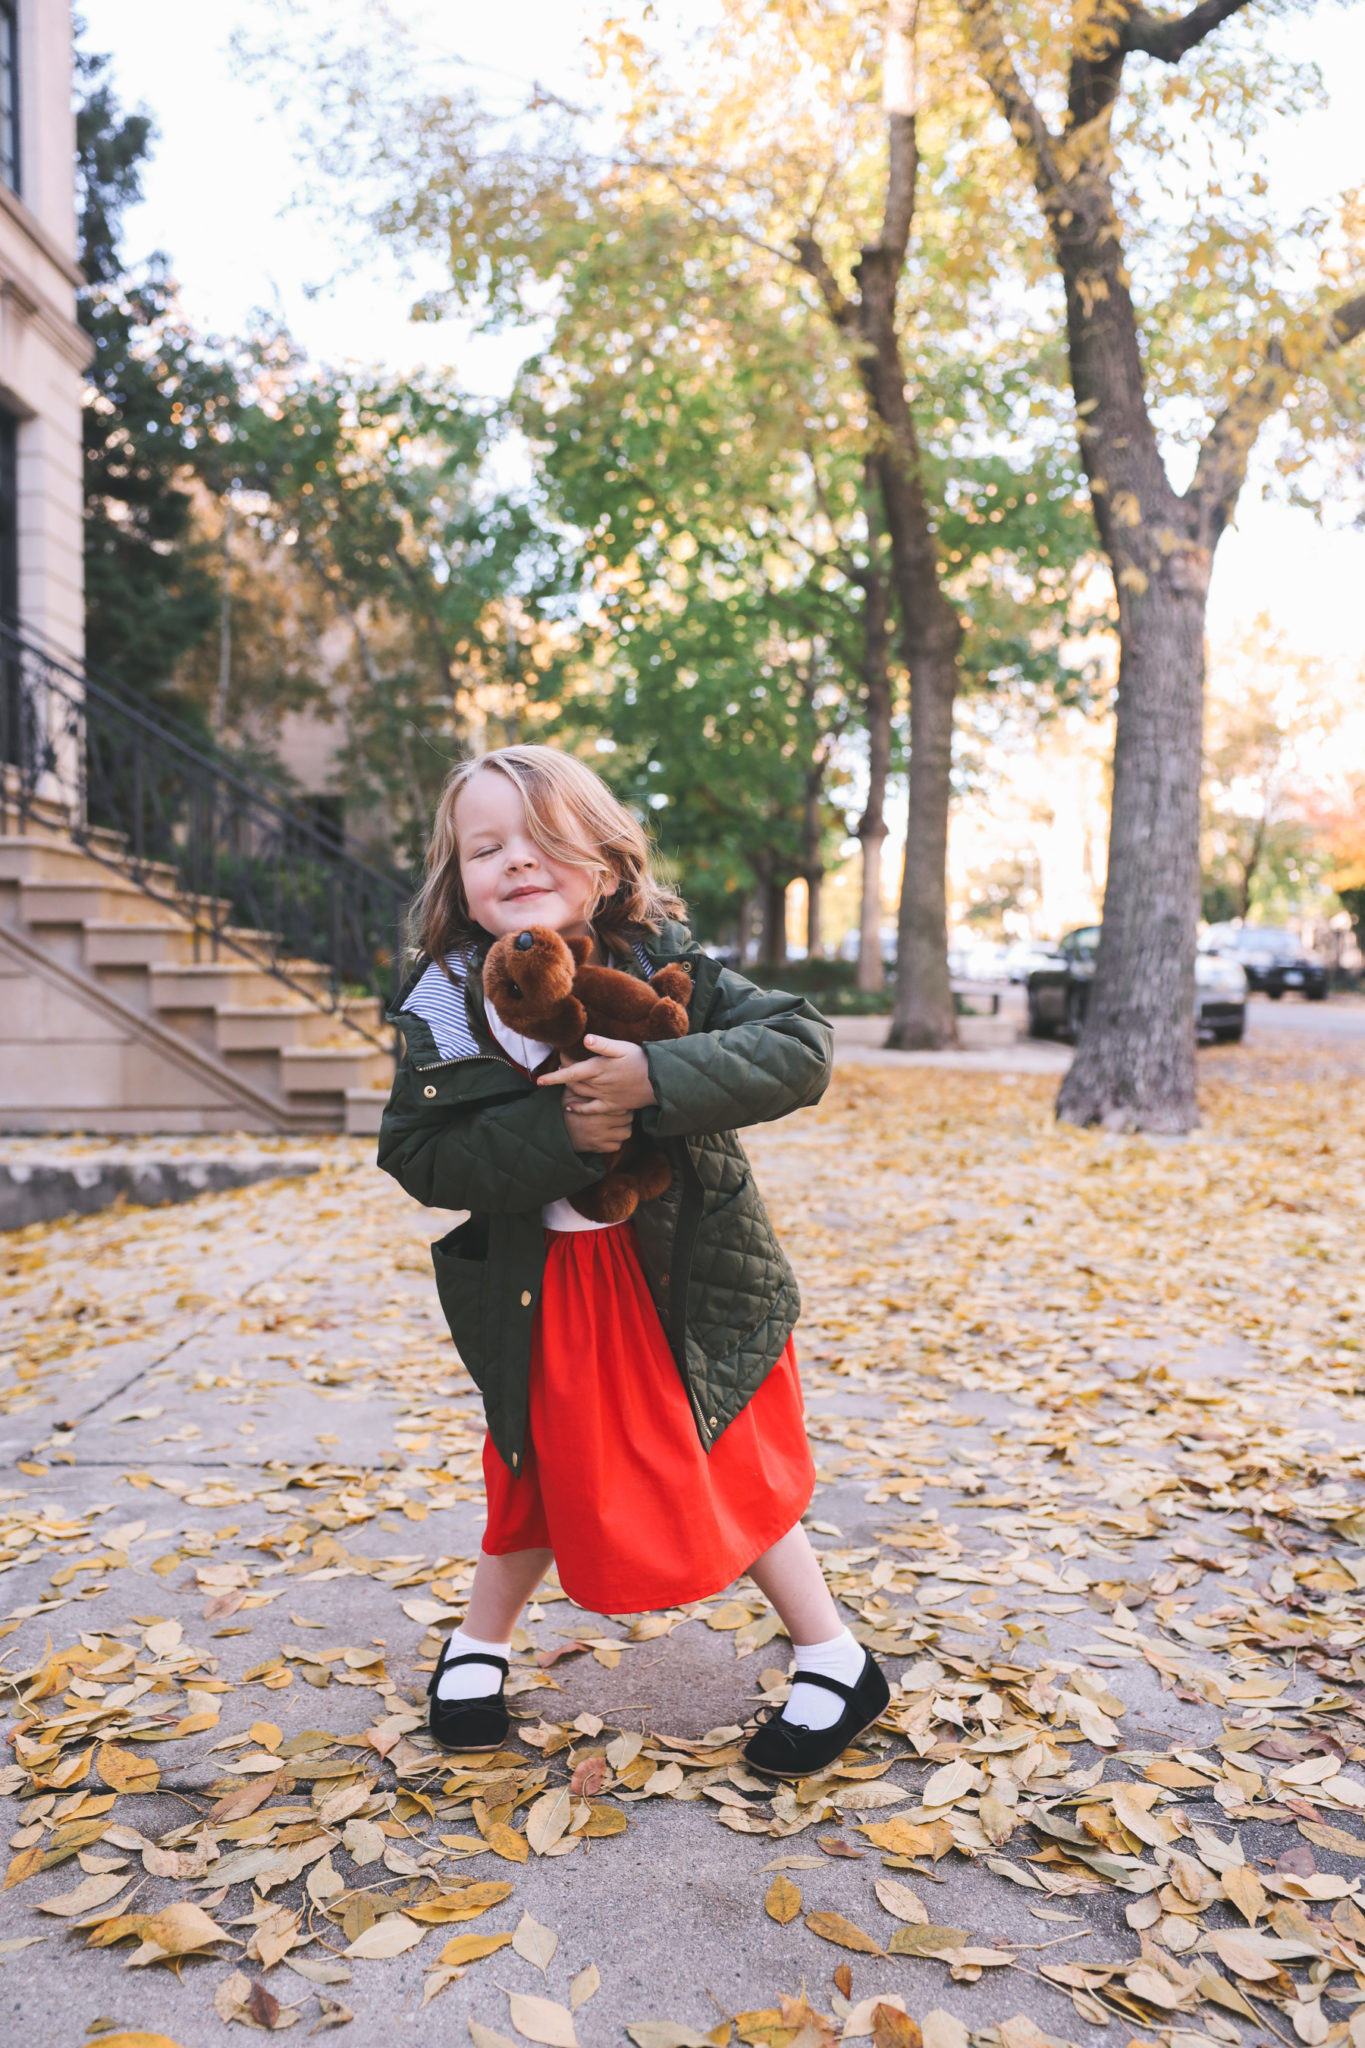 Little Orphan Annie Dress Costume | Kelly in the City